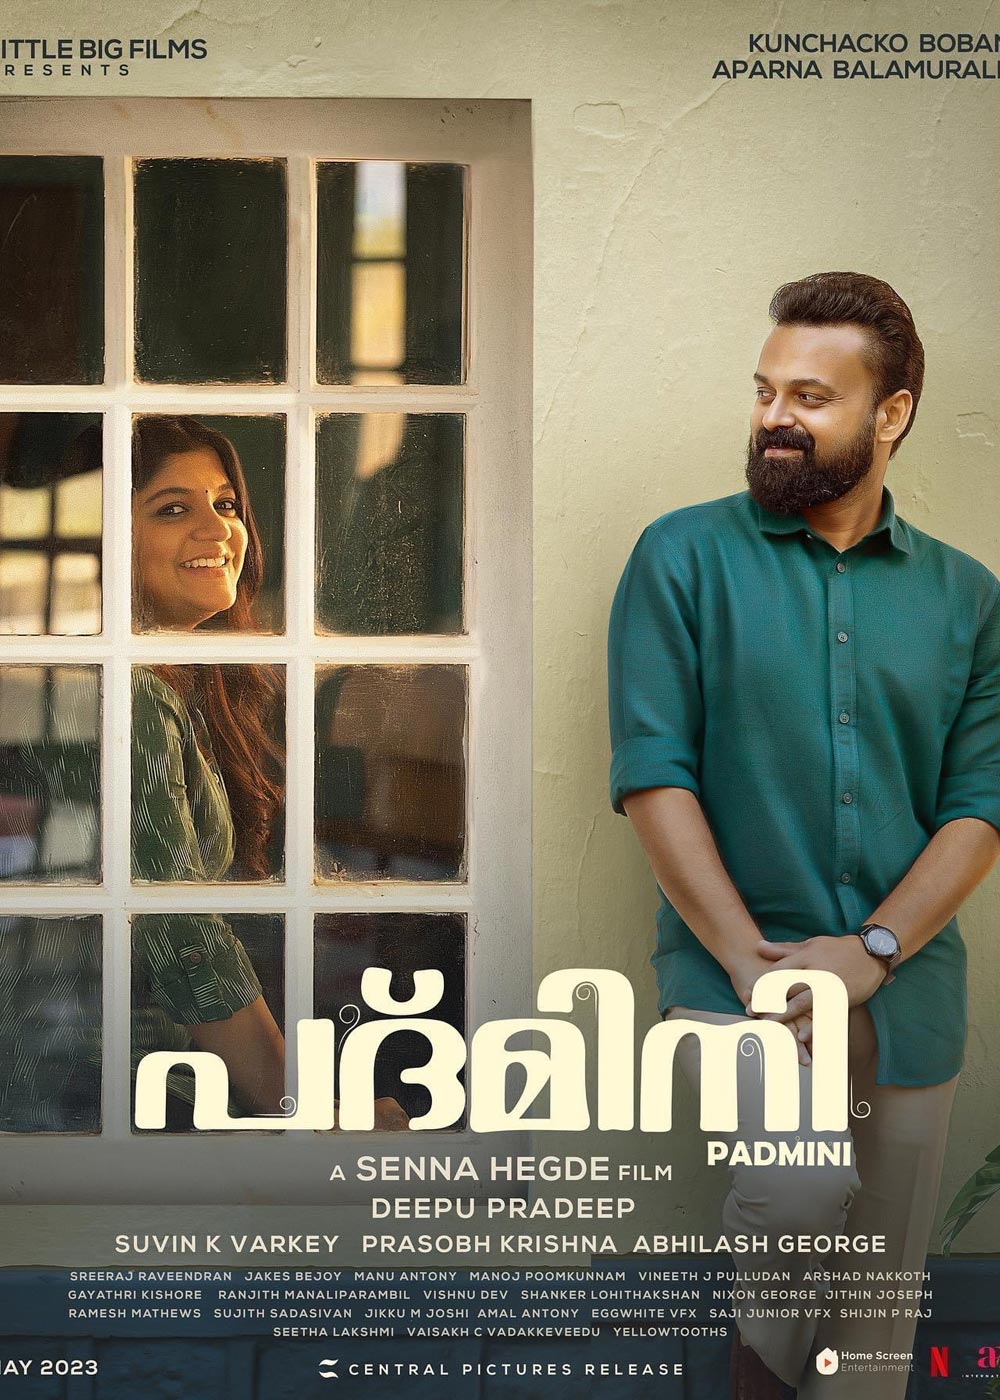 Padmini Movie (2023) Release Date, Review, Cast, Trailer, Watch